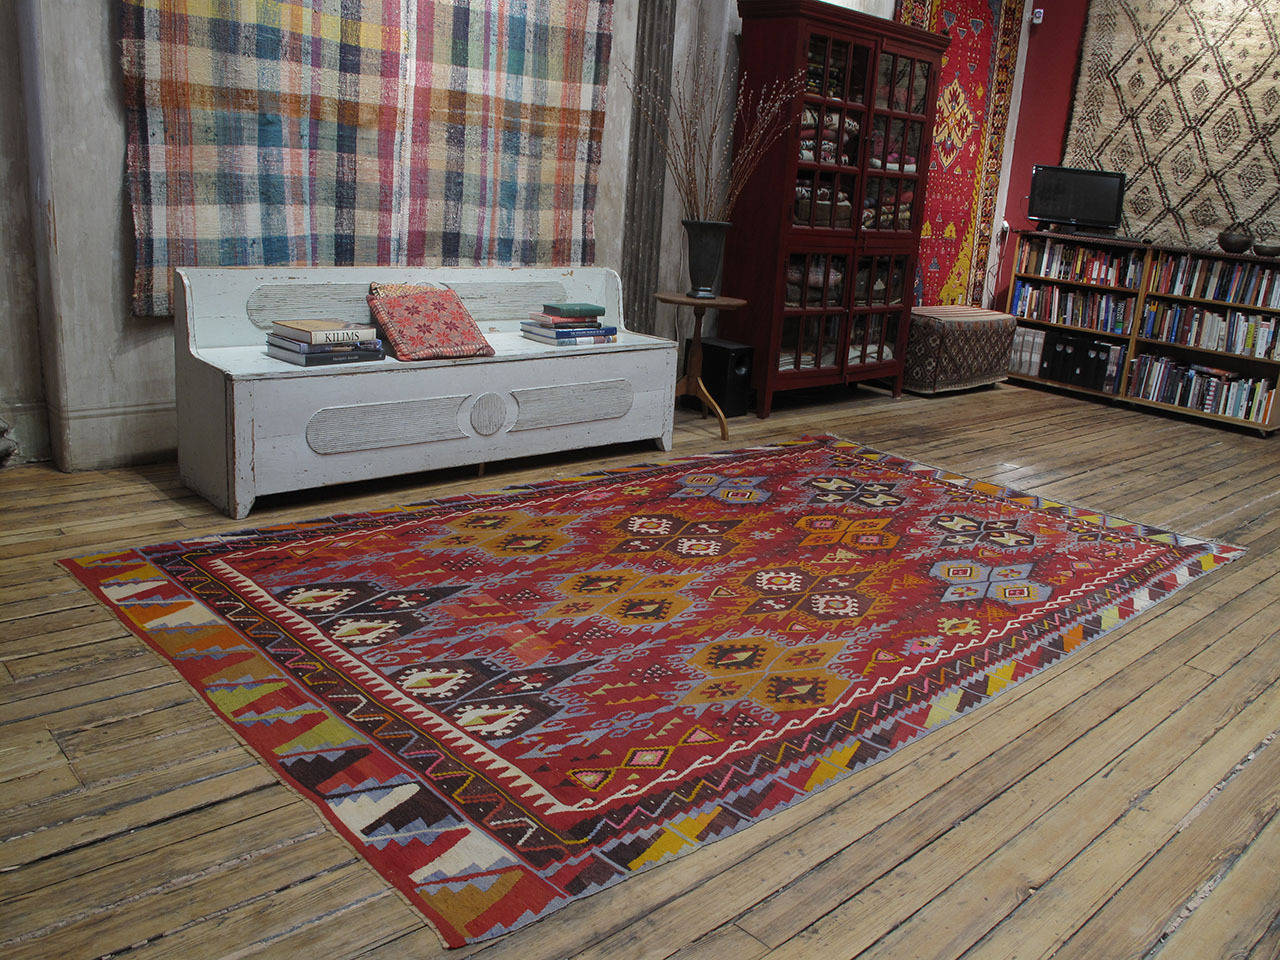 Sharkisla Kilim rug. A very nice old flat-weave rug from Eastern Turkey, displaying one of the characteristic designs of this region, but with a generous scale and really happy colors. Very charming rug.